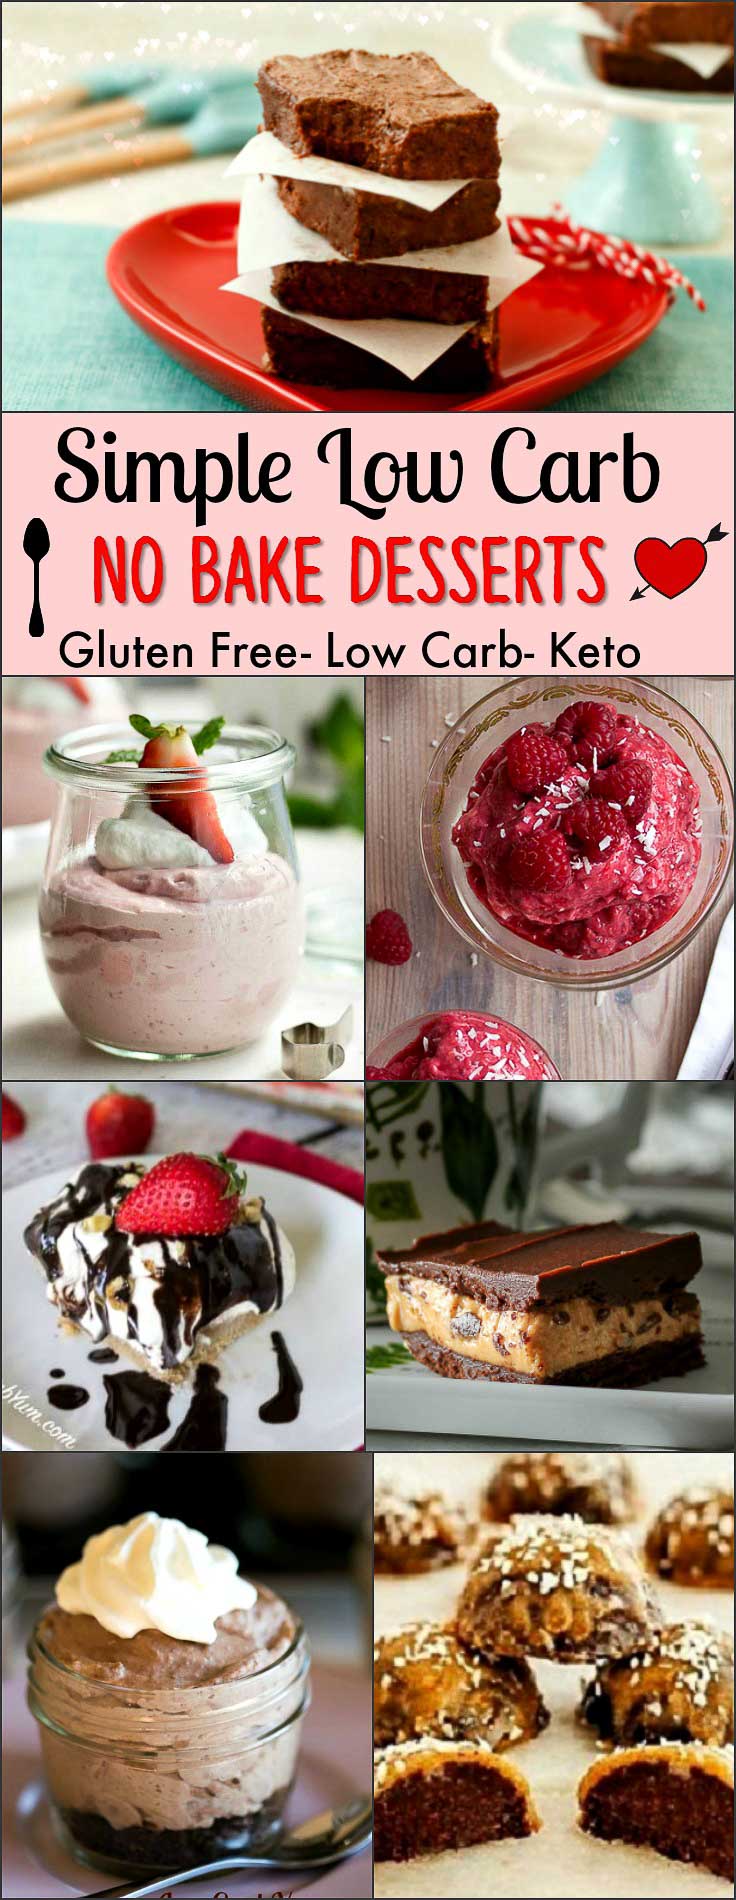 Simple Low Carb No Bake Desserts- Gluten Free, Low Carb & Keto